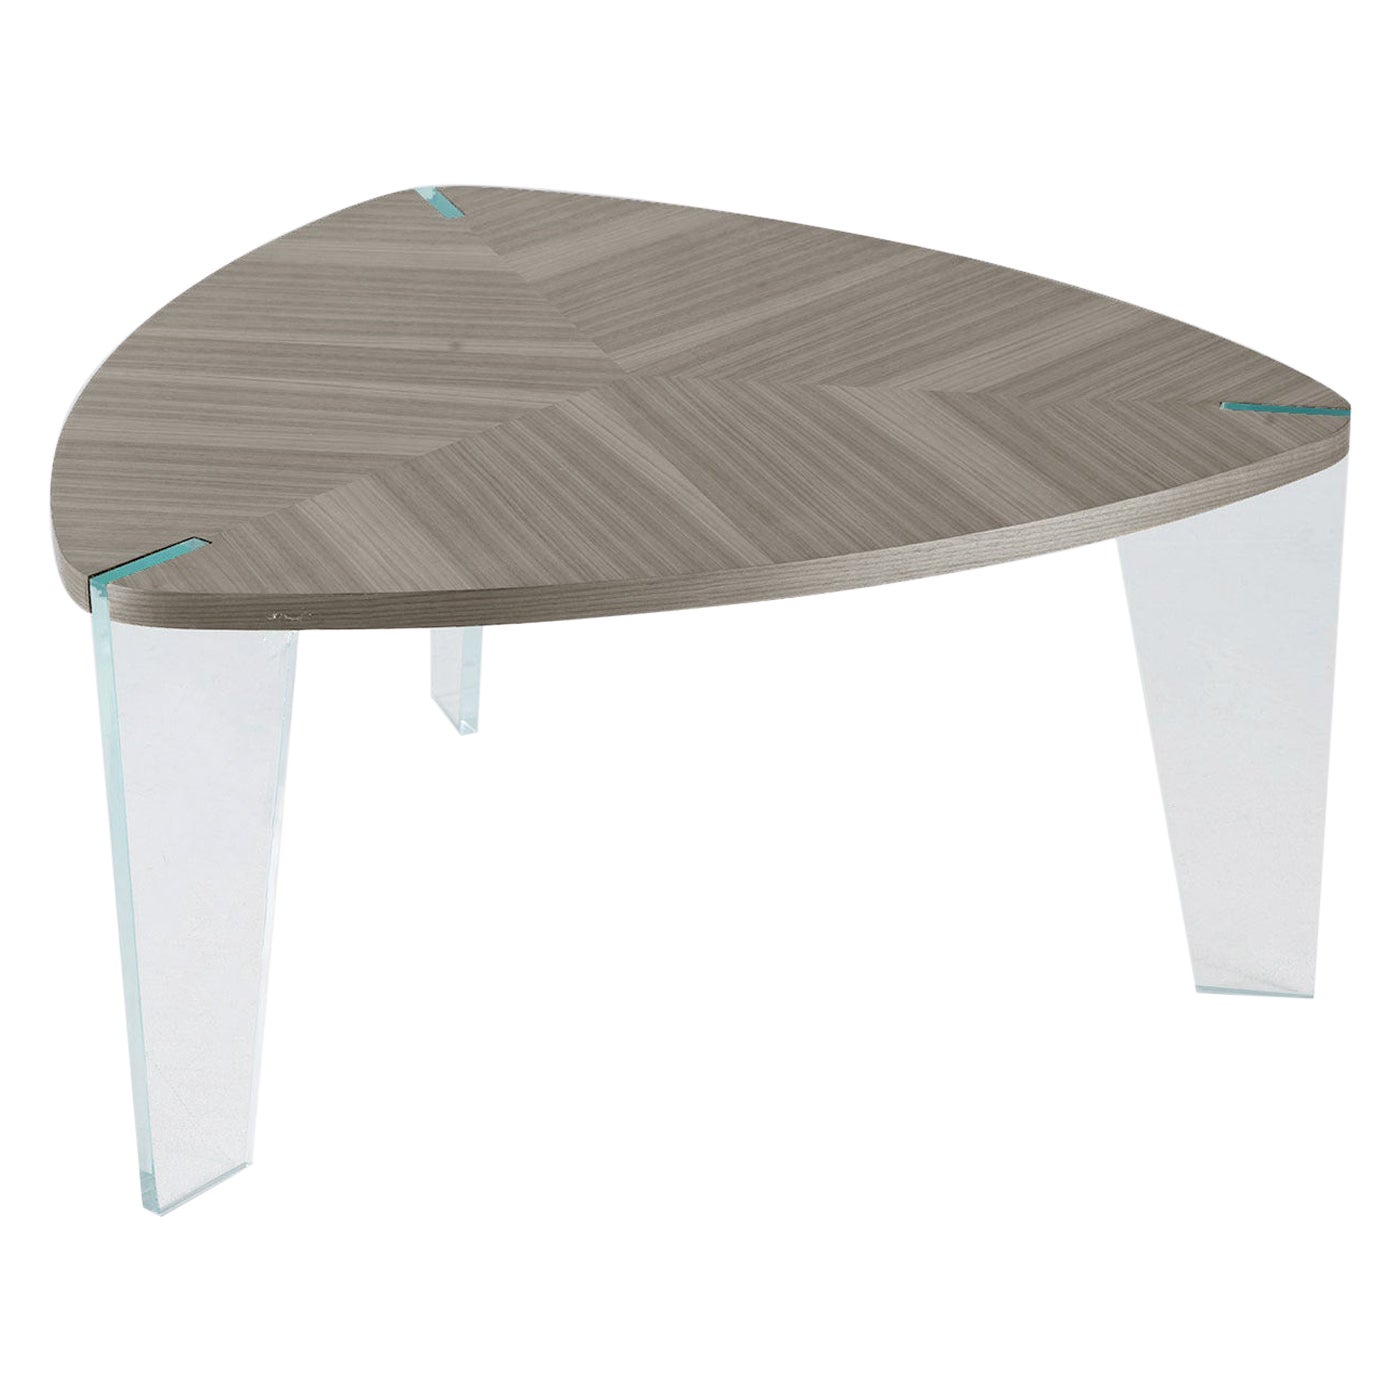 Sospeso Solid Wood Coffee Table, Walnut in Natural Grey Finish, Contemporary